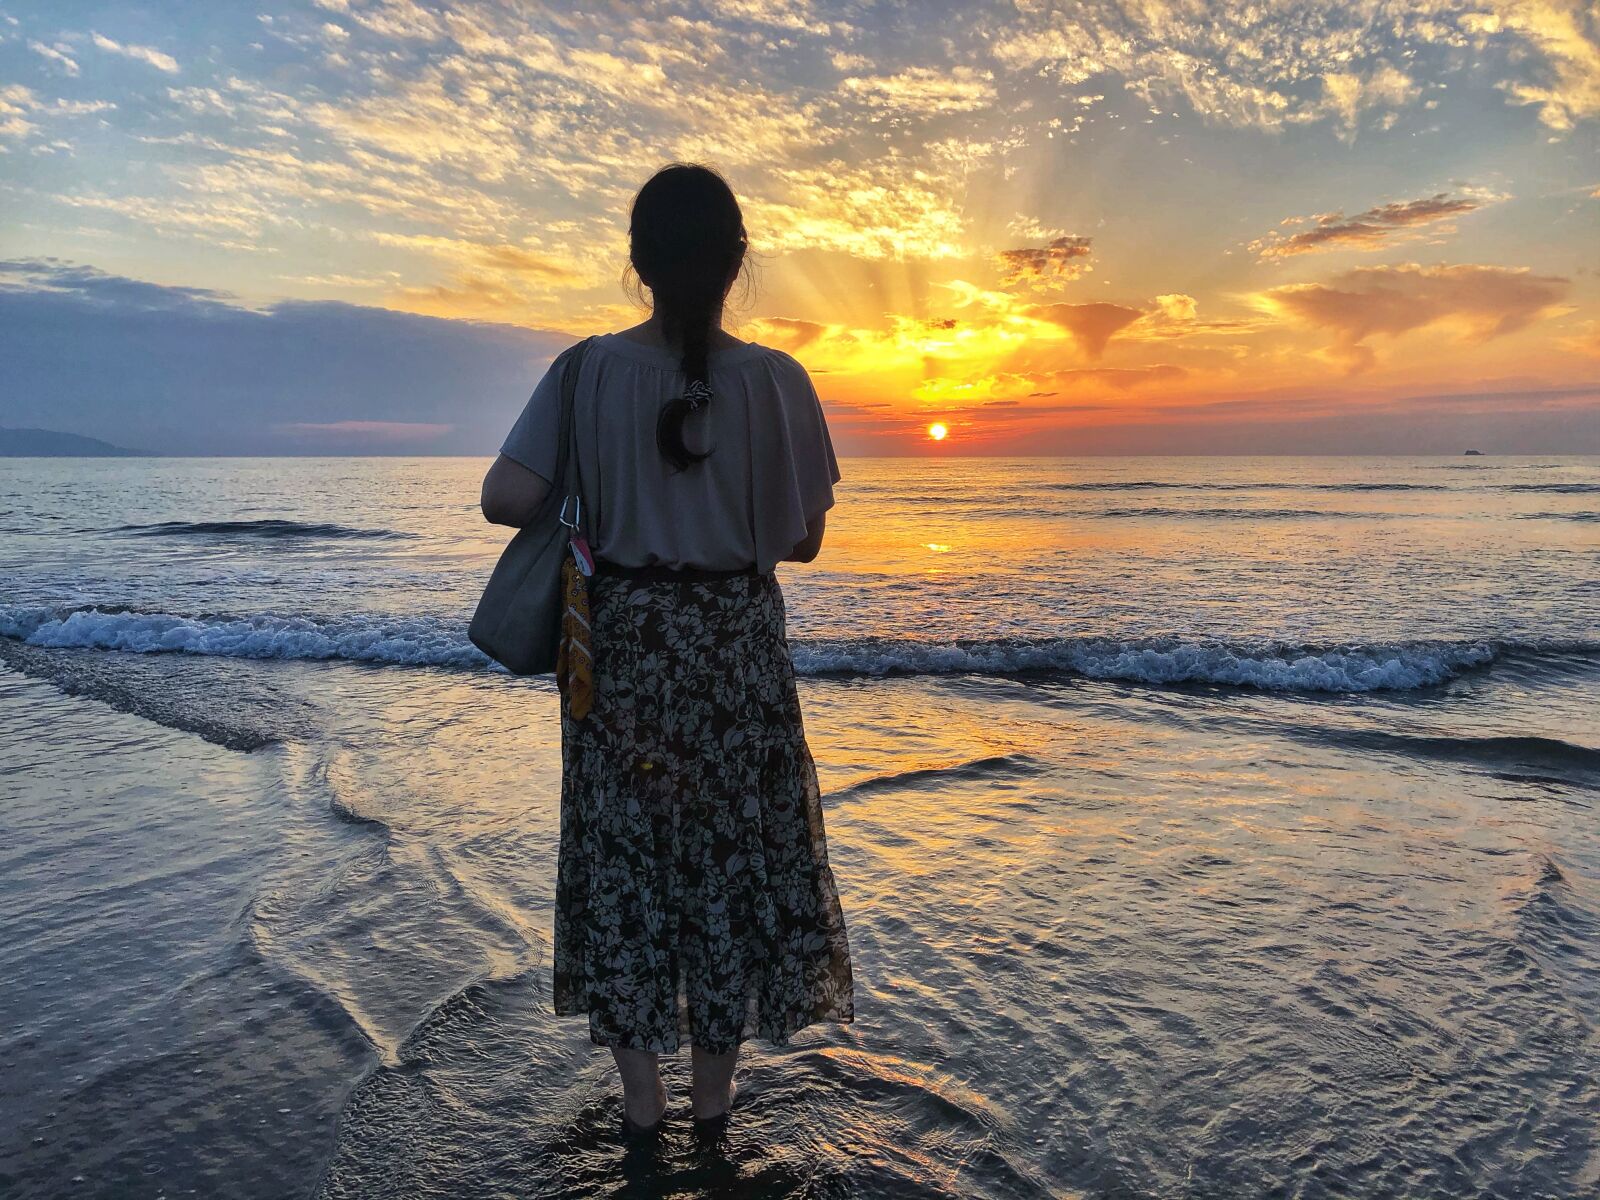 iPhone 8 Plus back dual camera 3.99mm f/1.8 sample photo. Woman, sunset, silhouette photography